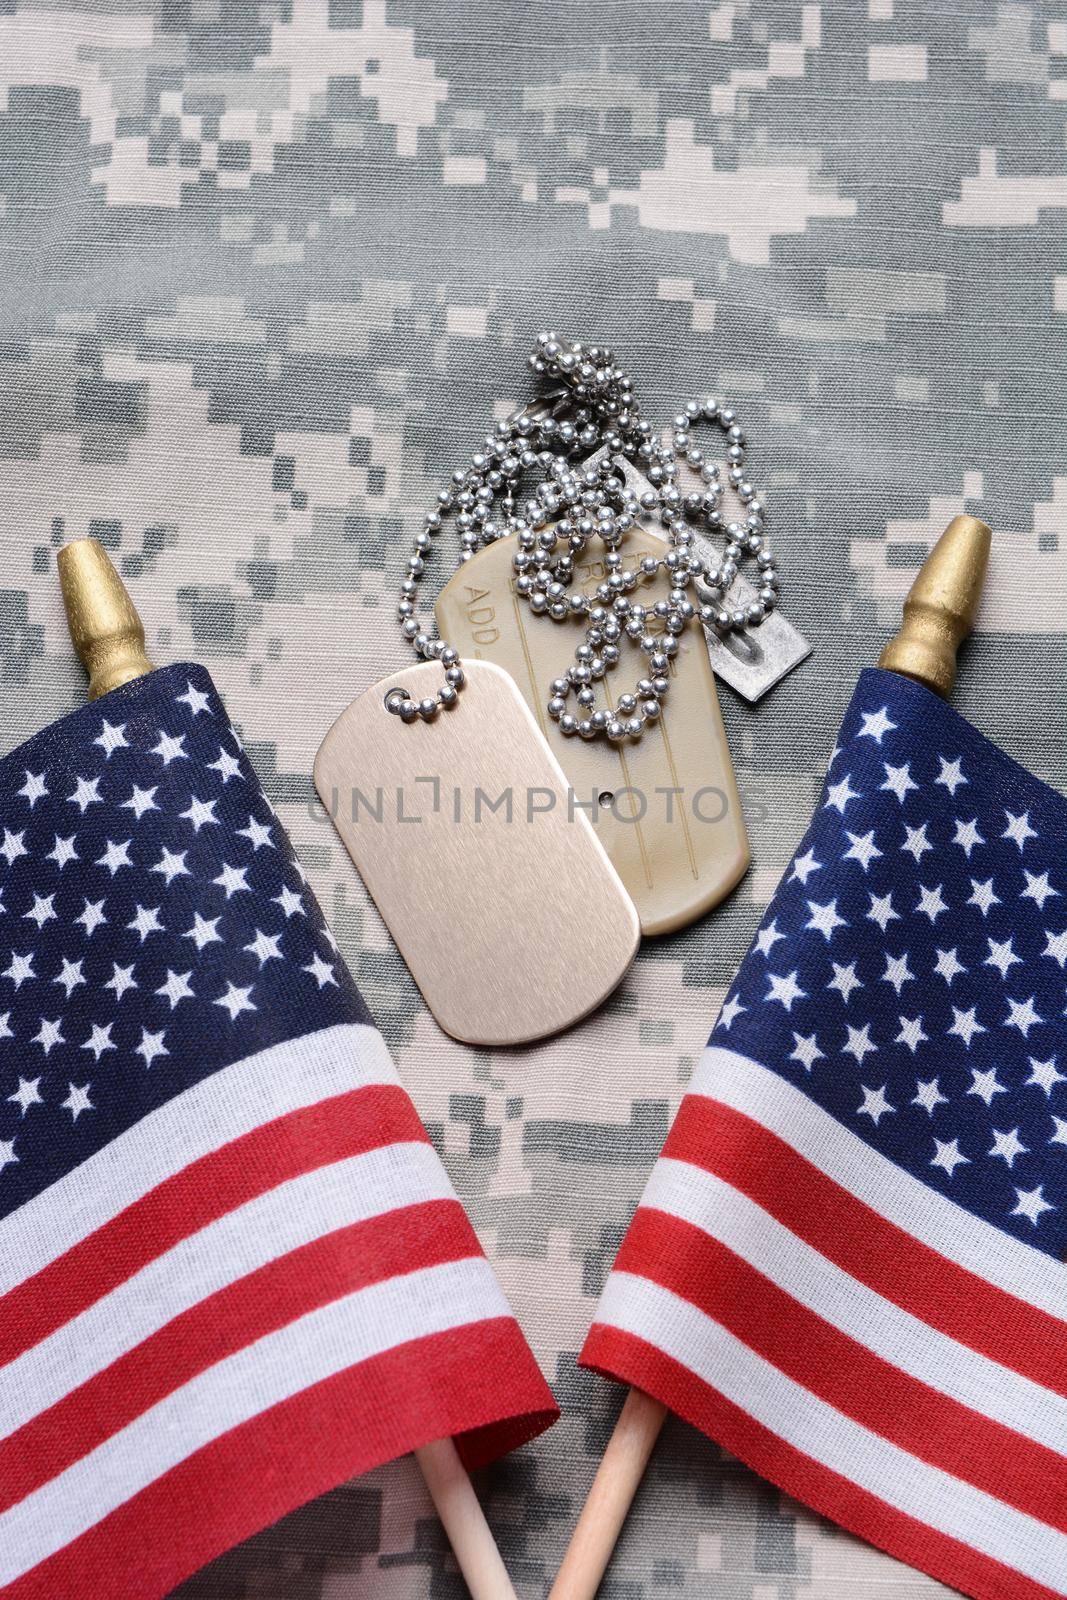 Closeup of two crossed American Flags on camouflage material with dog tags in the middle. The ID tags are blank. Vertical format filling the frame.